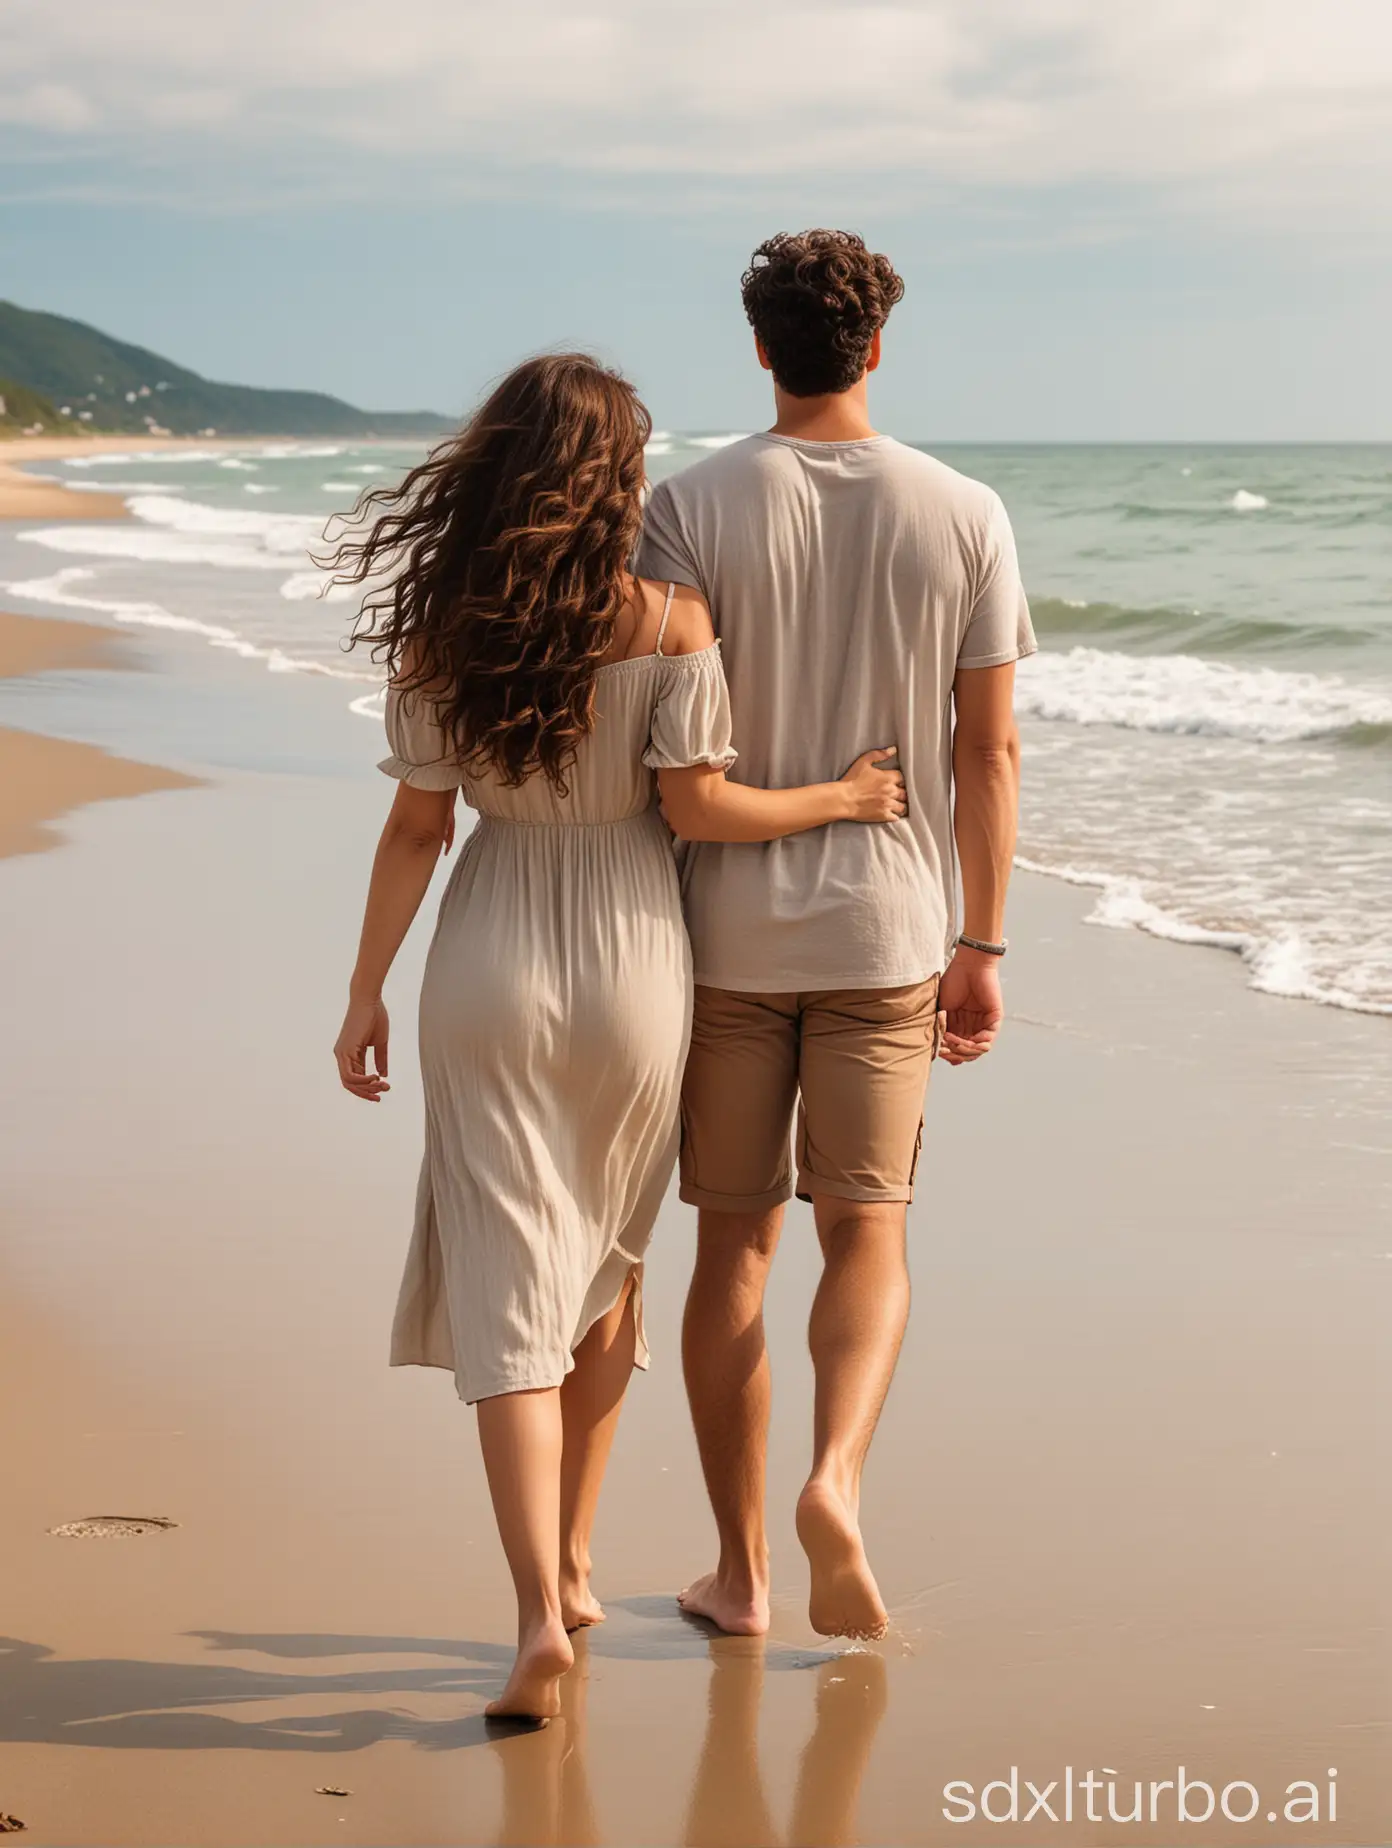 medium straight brown hair woman walking on a beach, holding hand with a curly man, view from behind